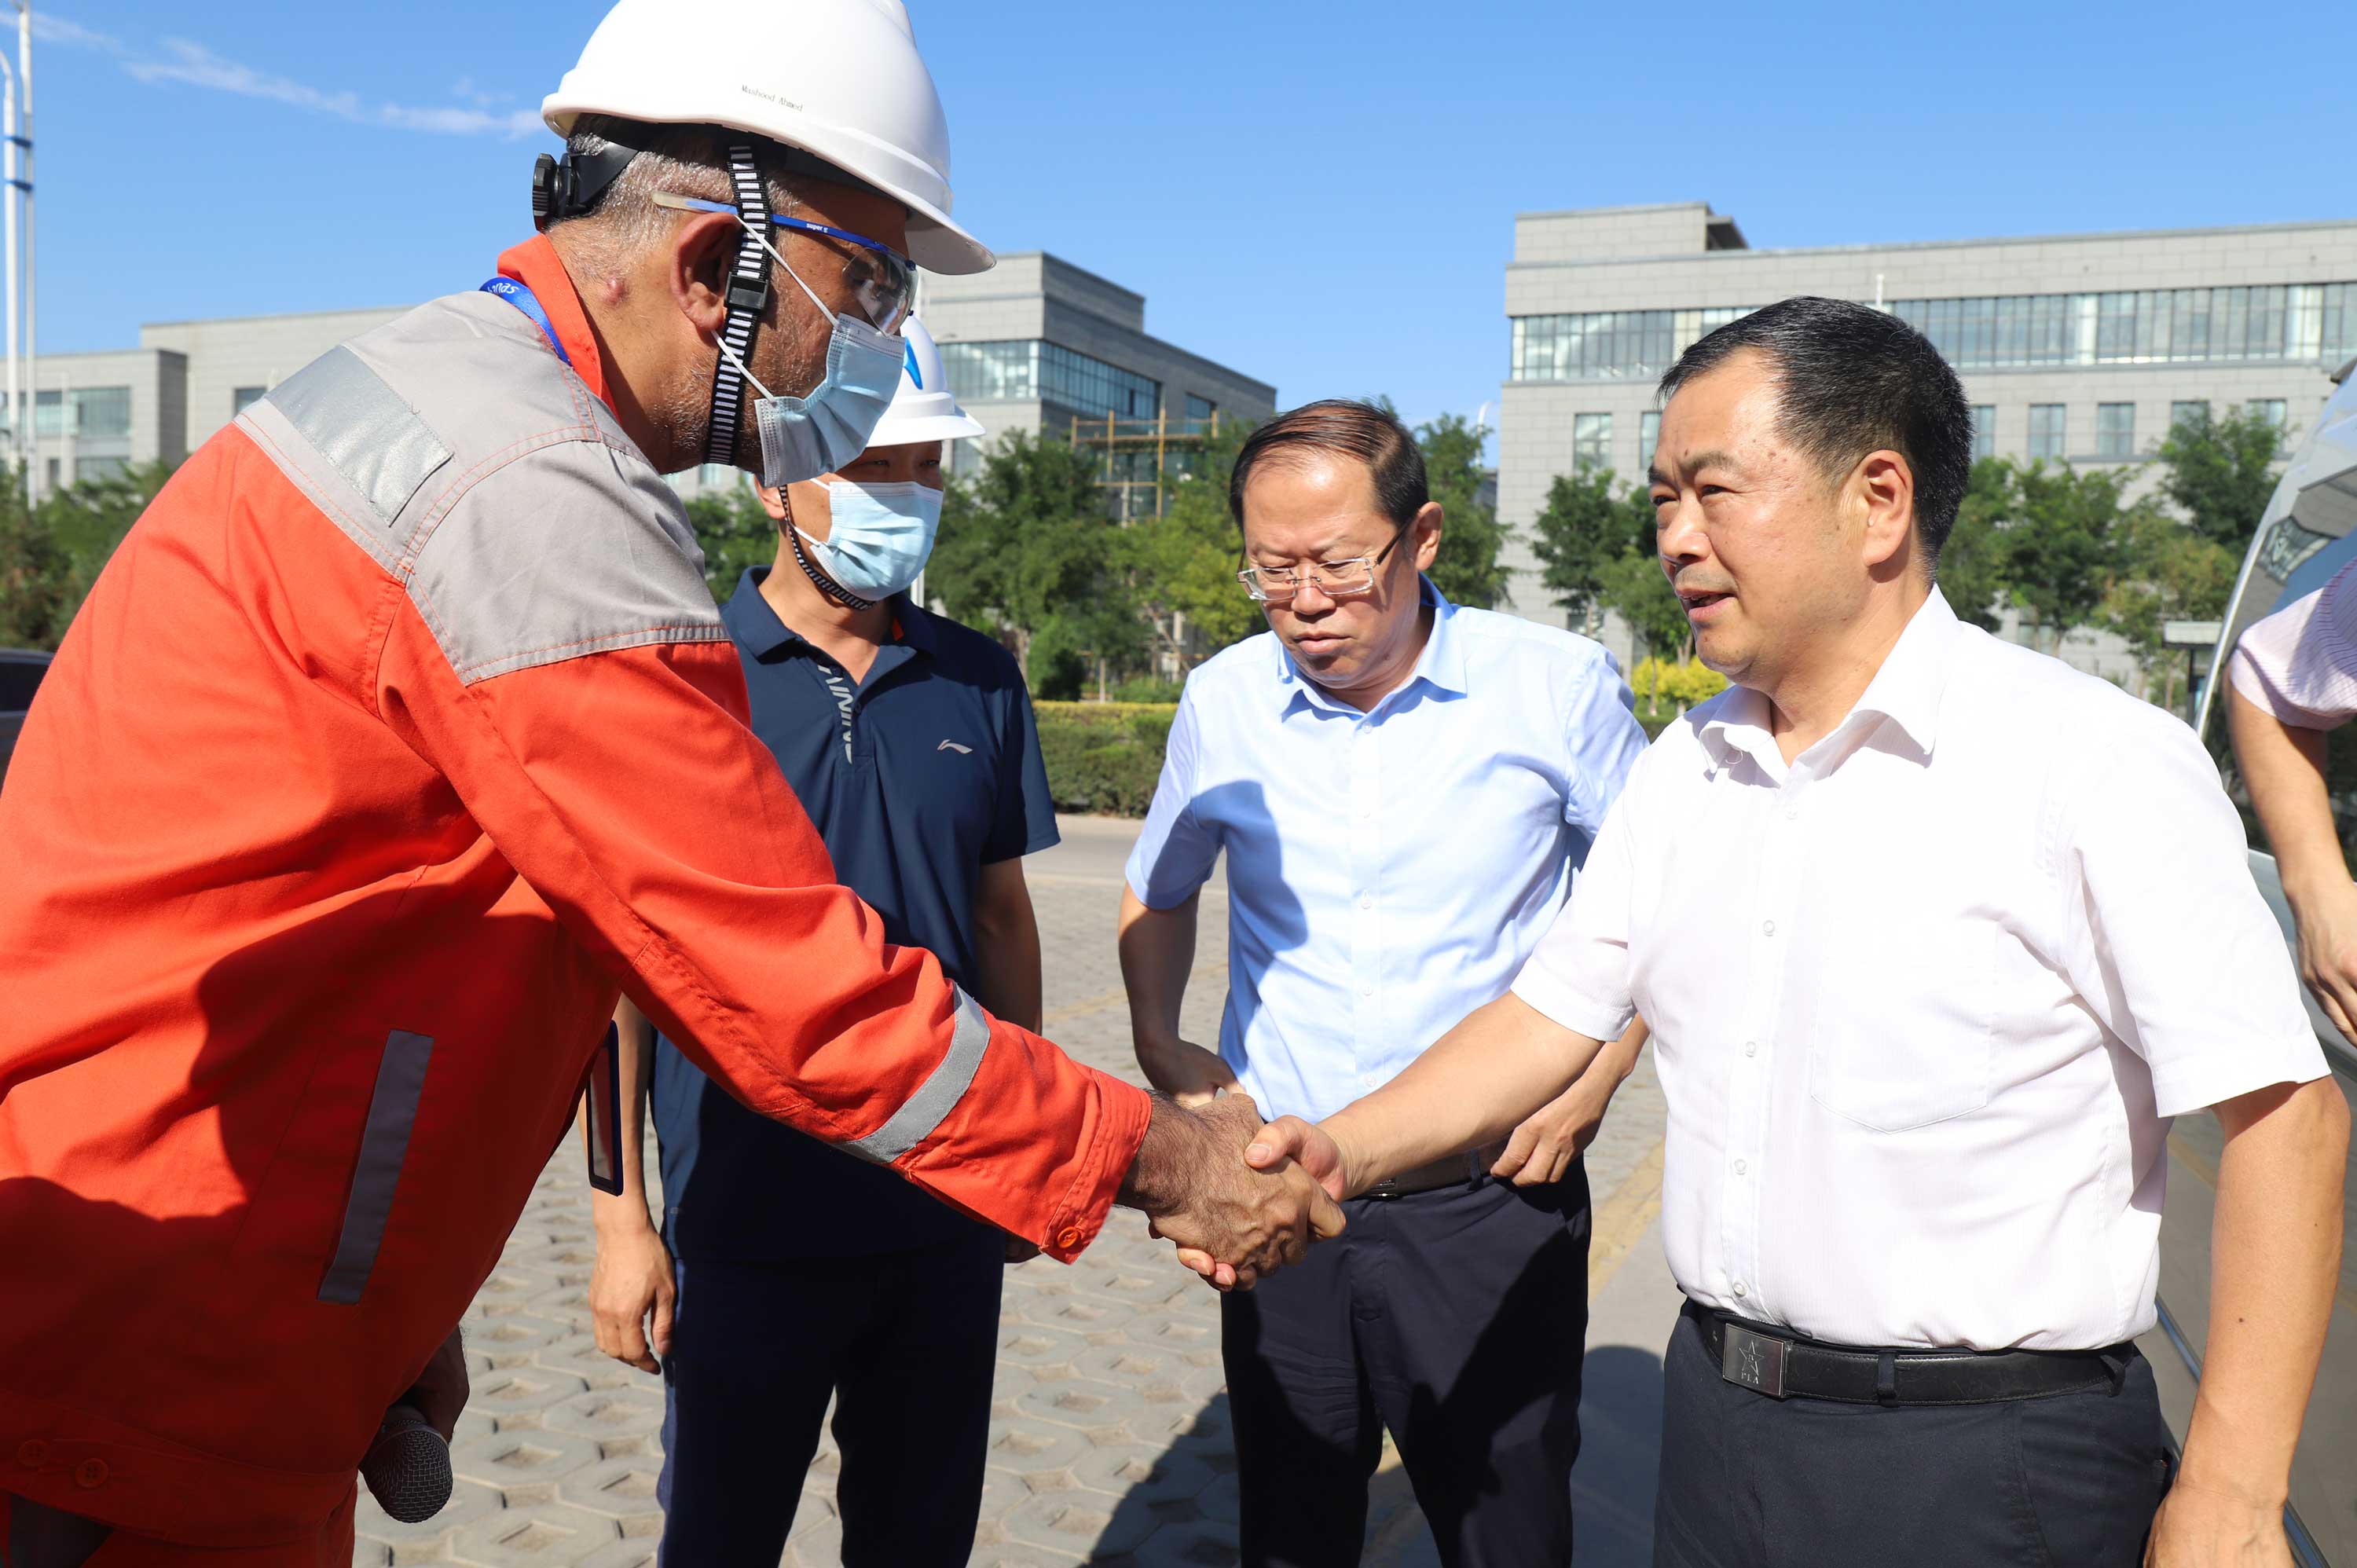 Leaders of the Ministry of National Emergency Management visited Hanas LNG Plant